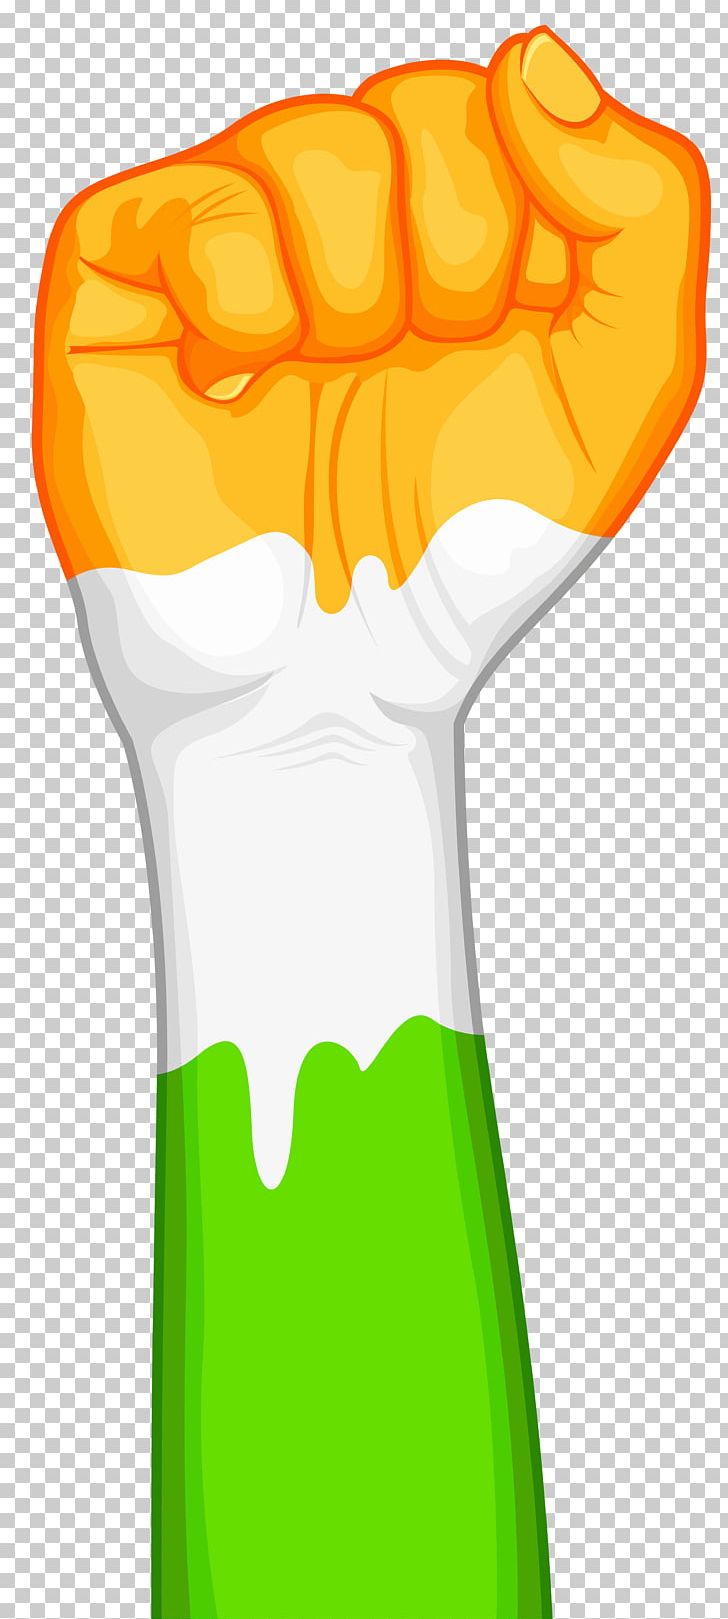 Republic Day January 26 Indian Independence Day Public Holiday Desktop PNG, Clipart, Desktop Wallpaper, Diwali, Drinkware, Finger, Fist Free PNG Download